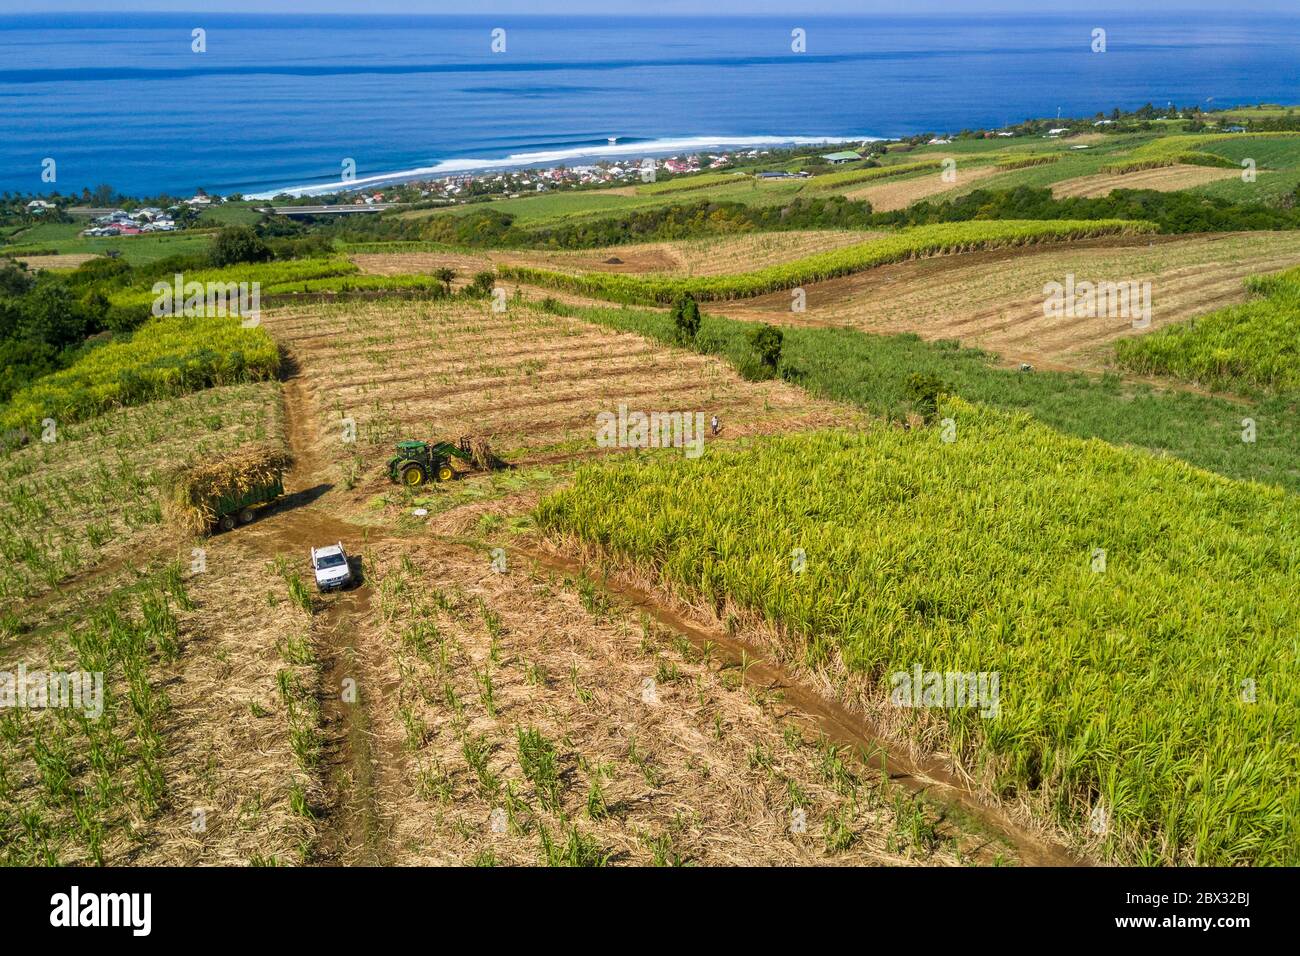 France, Reunion island (French overseas department), Petite-Ile, cutting and harvesting sugar cane (aerial view) Stock Photo